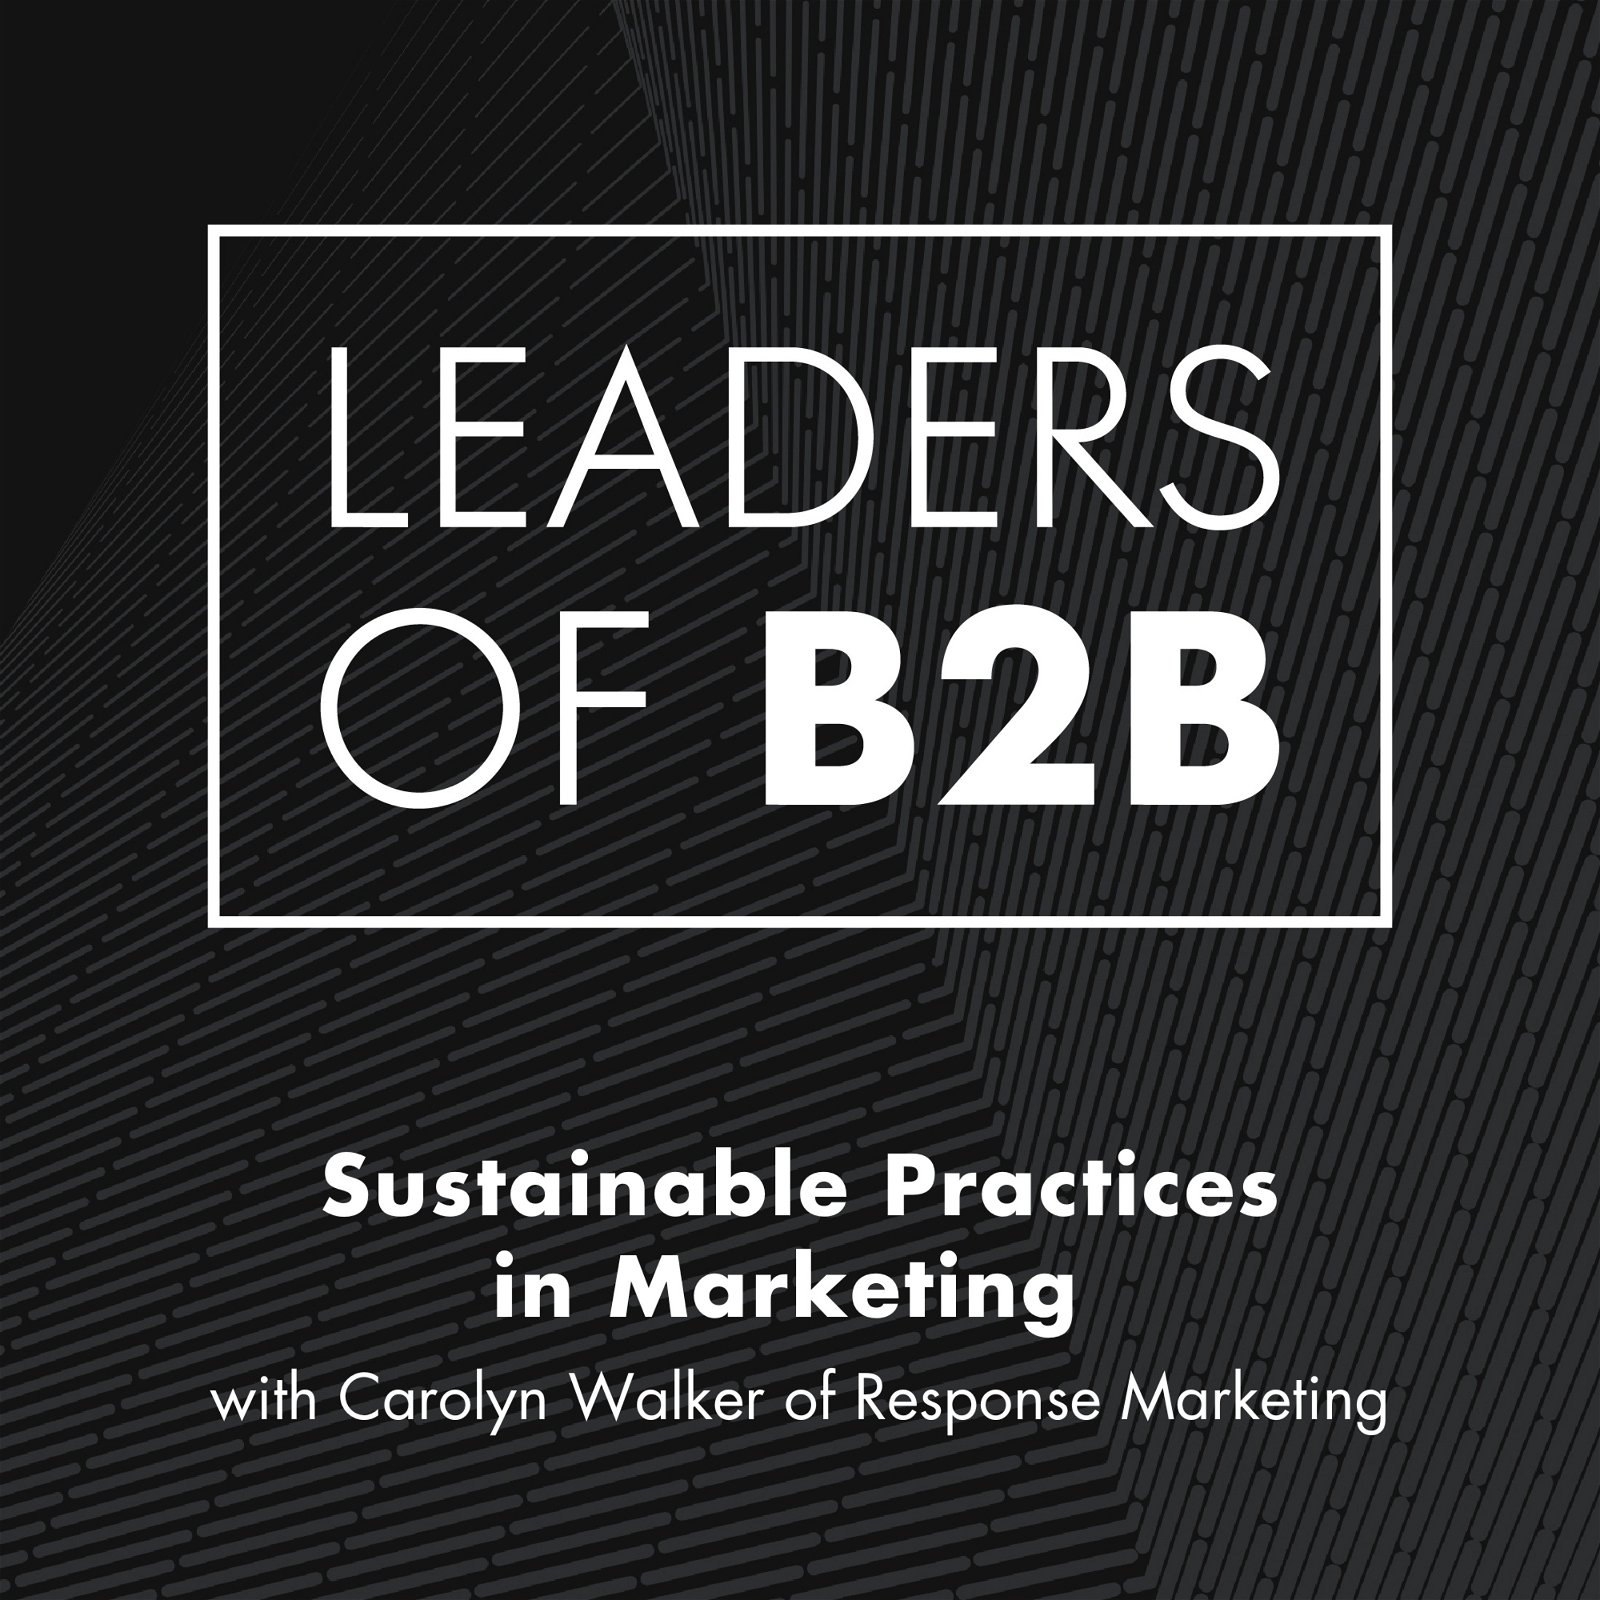 Sustainable Practices in Marketing with Carolyn Walker of Response Marketing